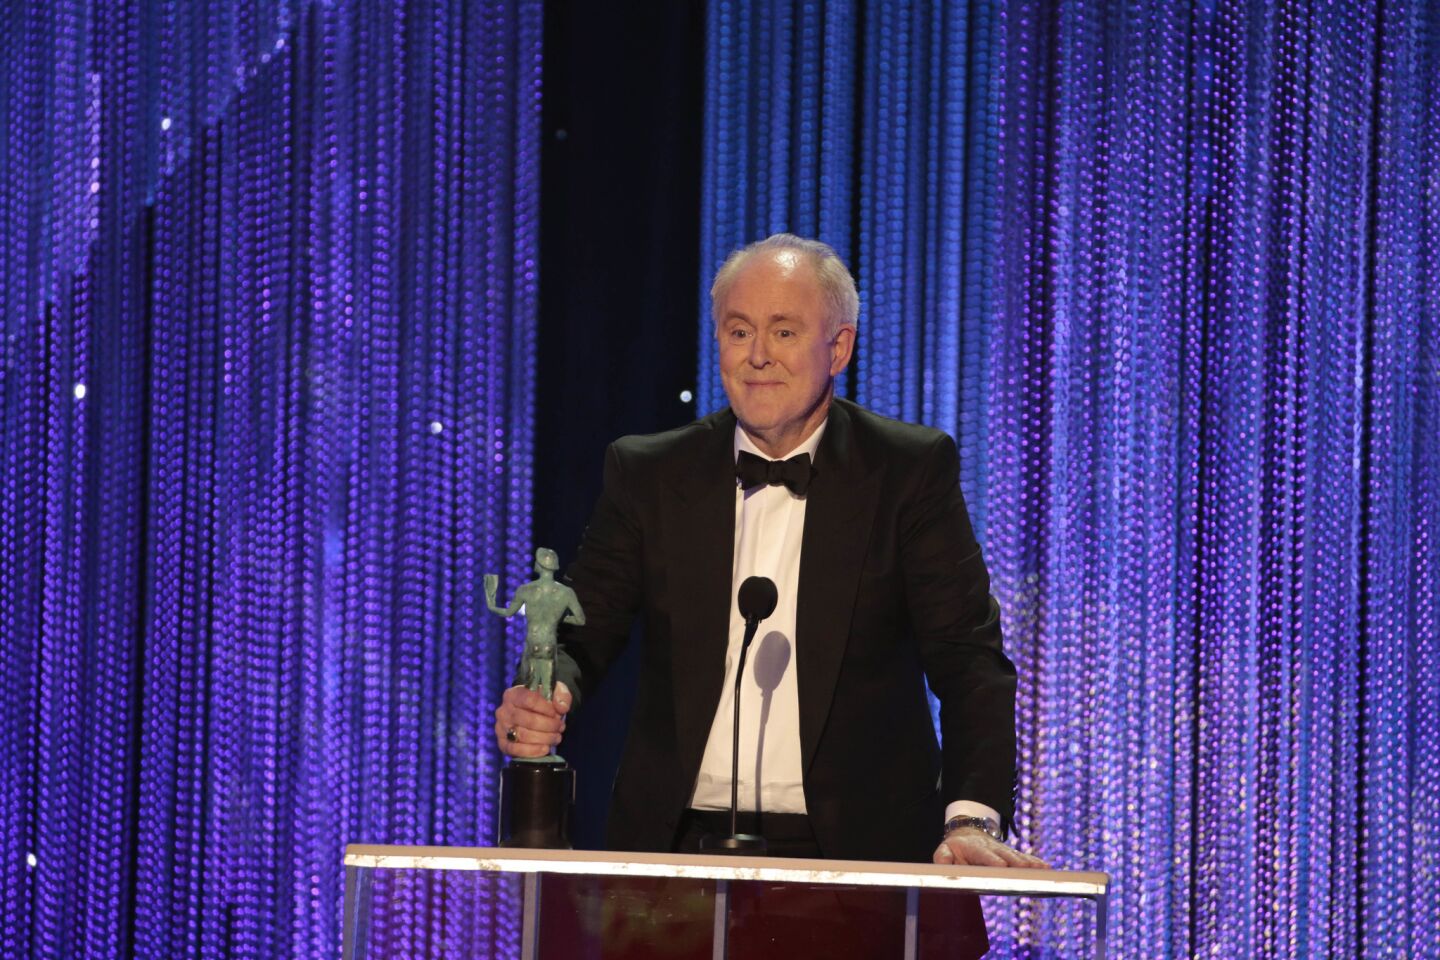 John Lithgow wins male actor in a drama series for "The Crown."